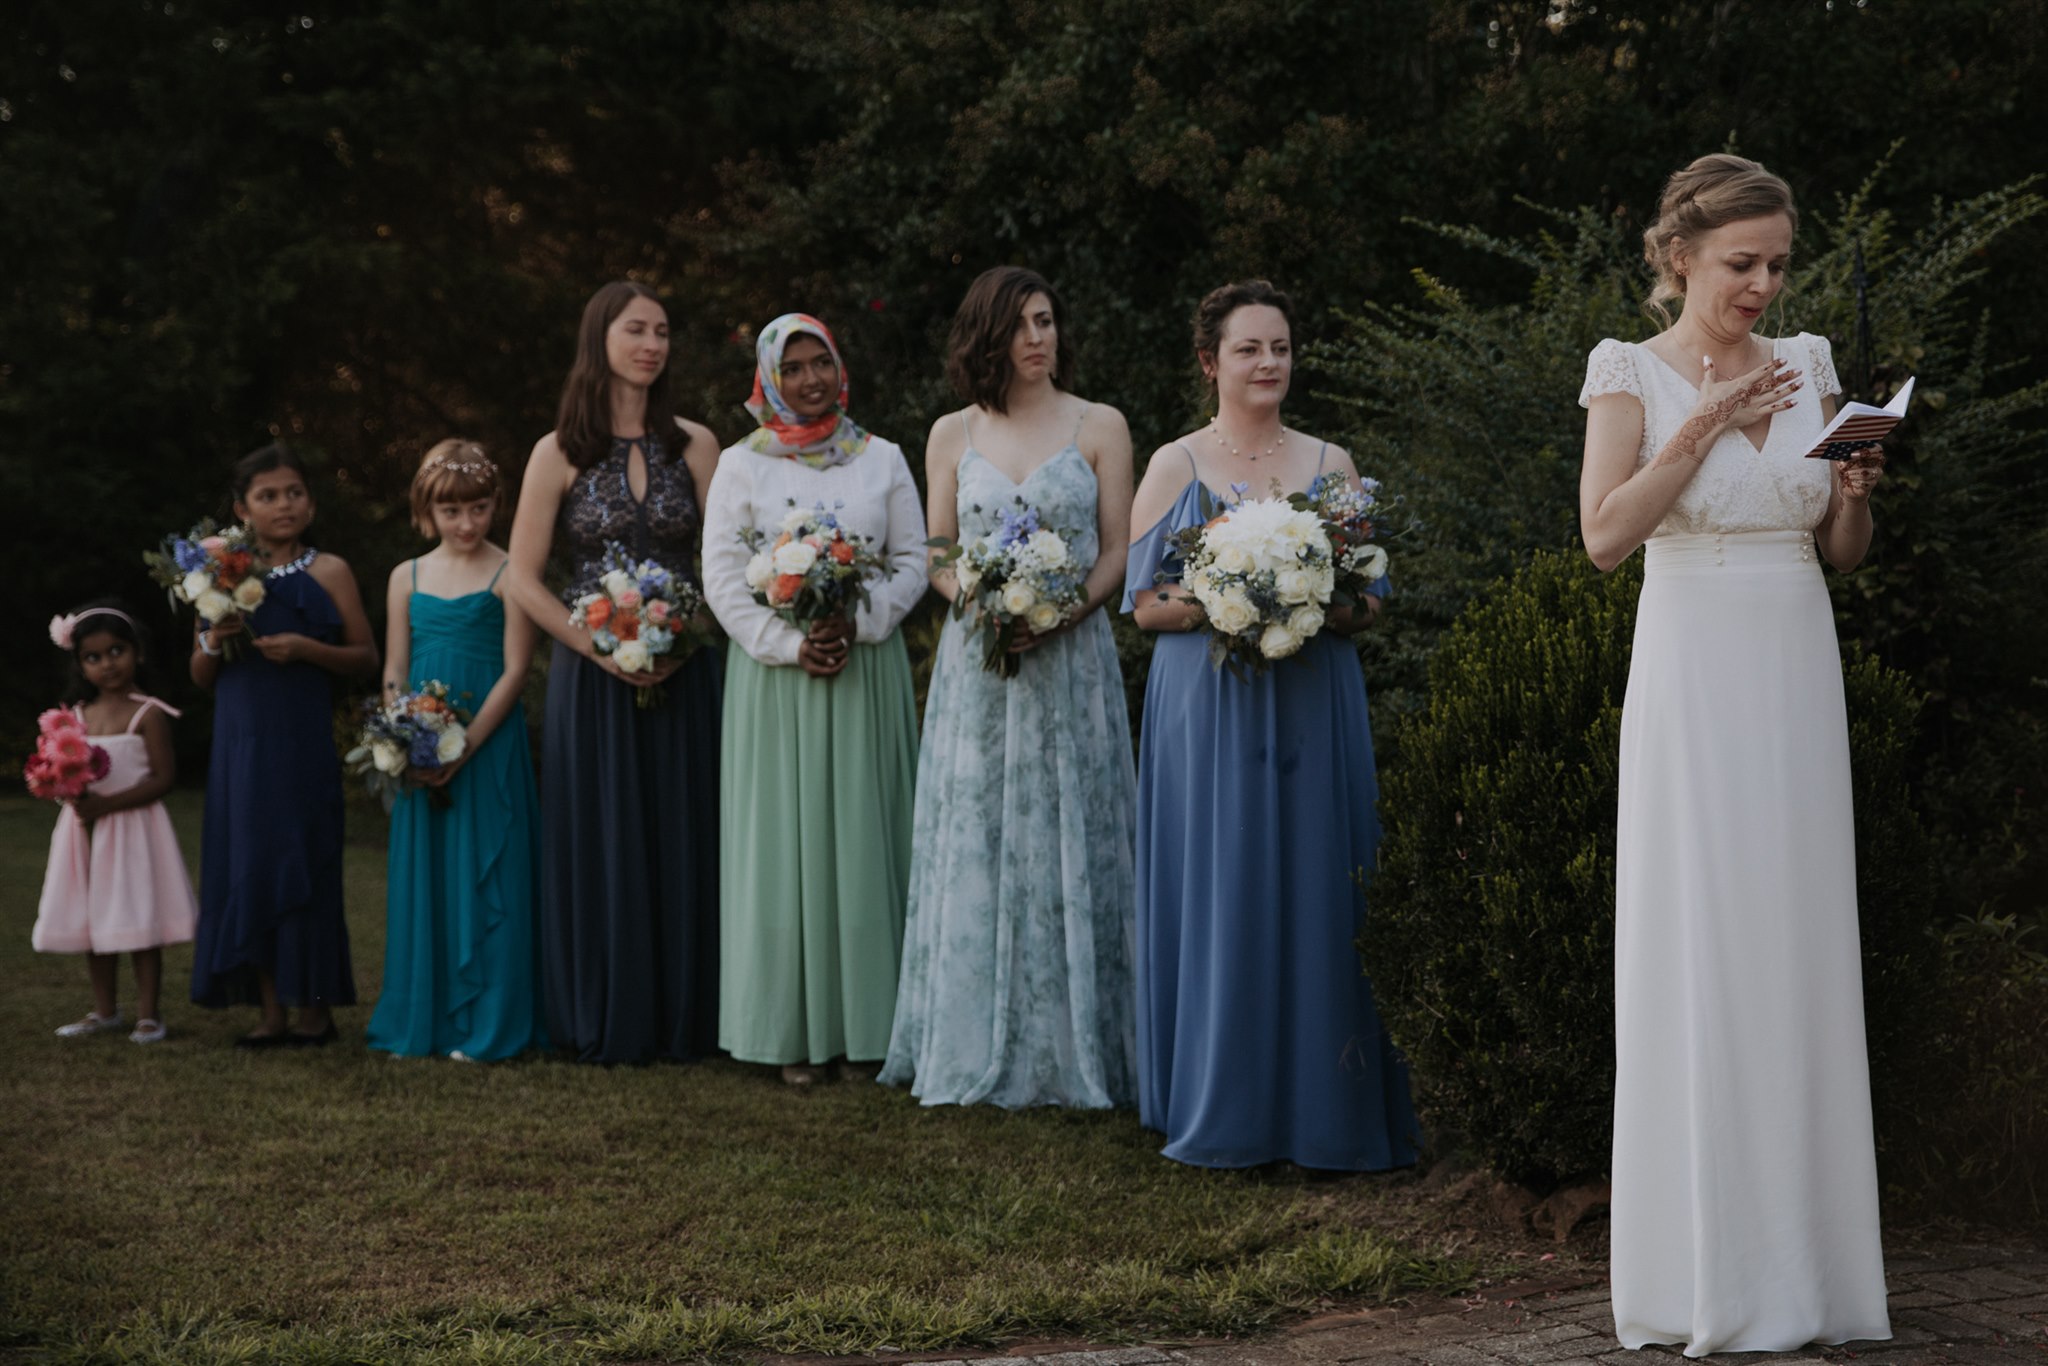 A bride reads her vows while her brides-persons stand in line behind her.